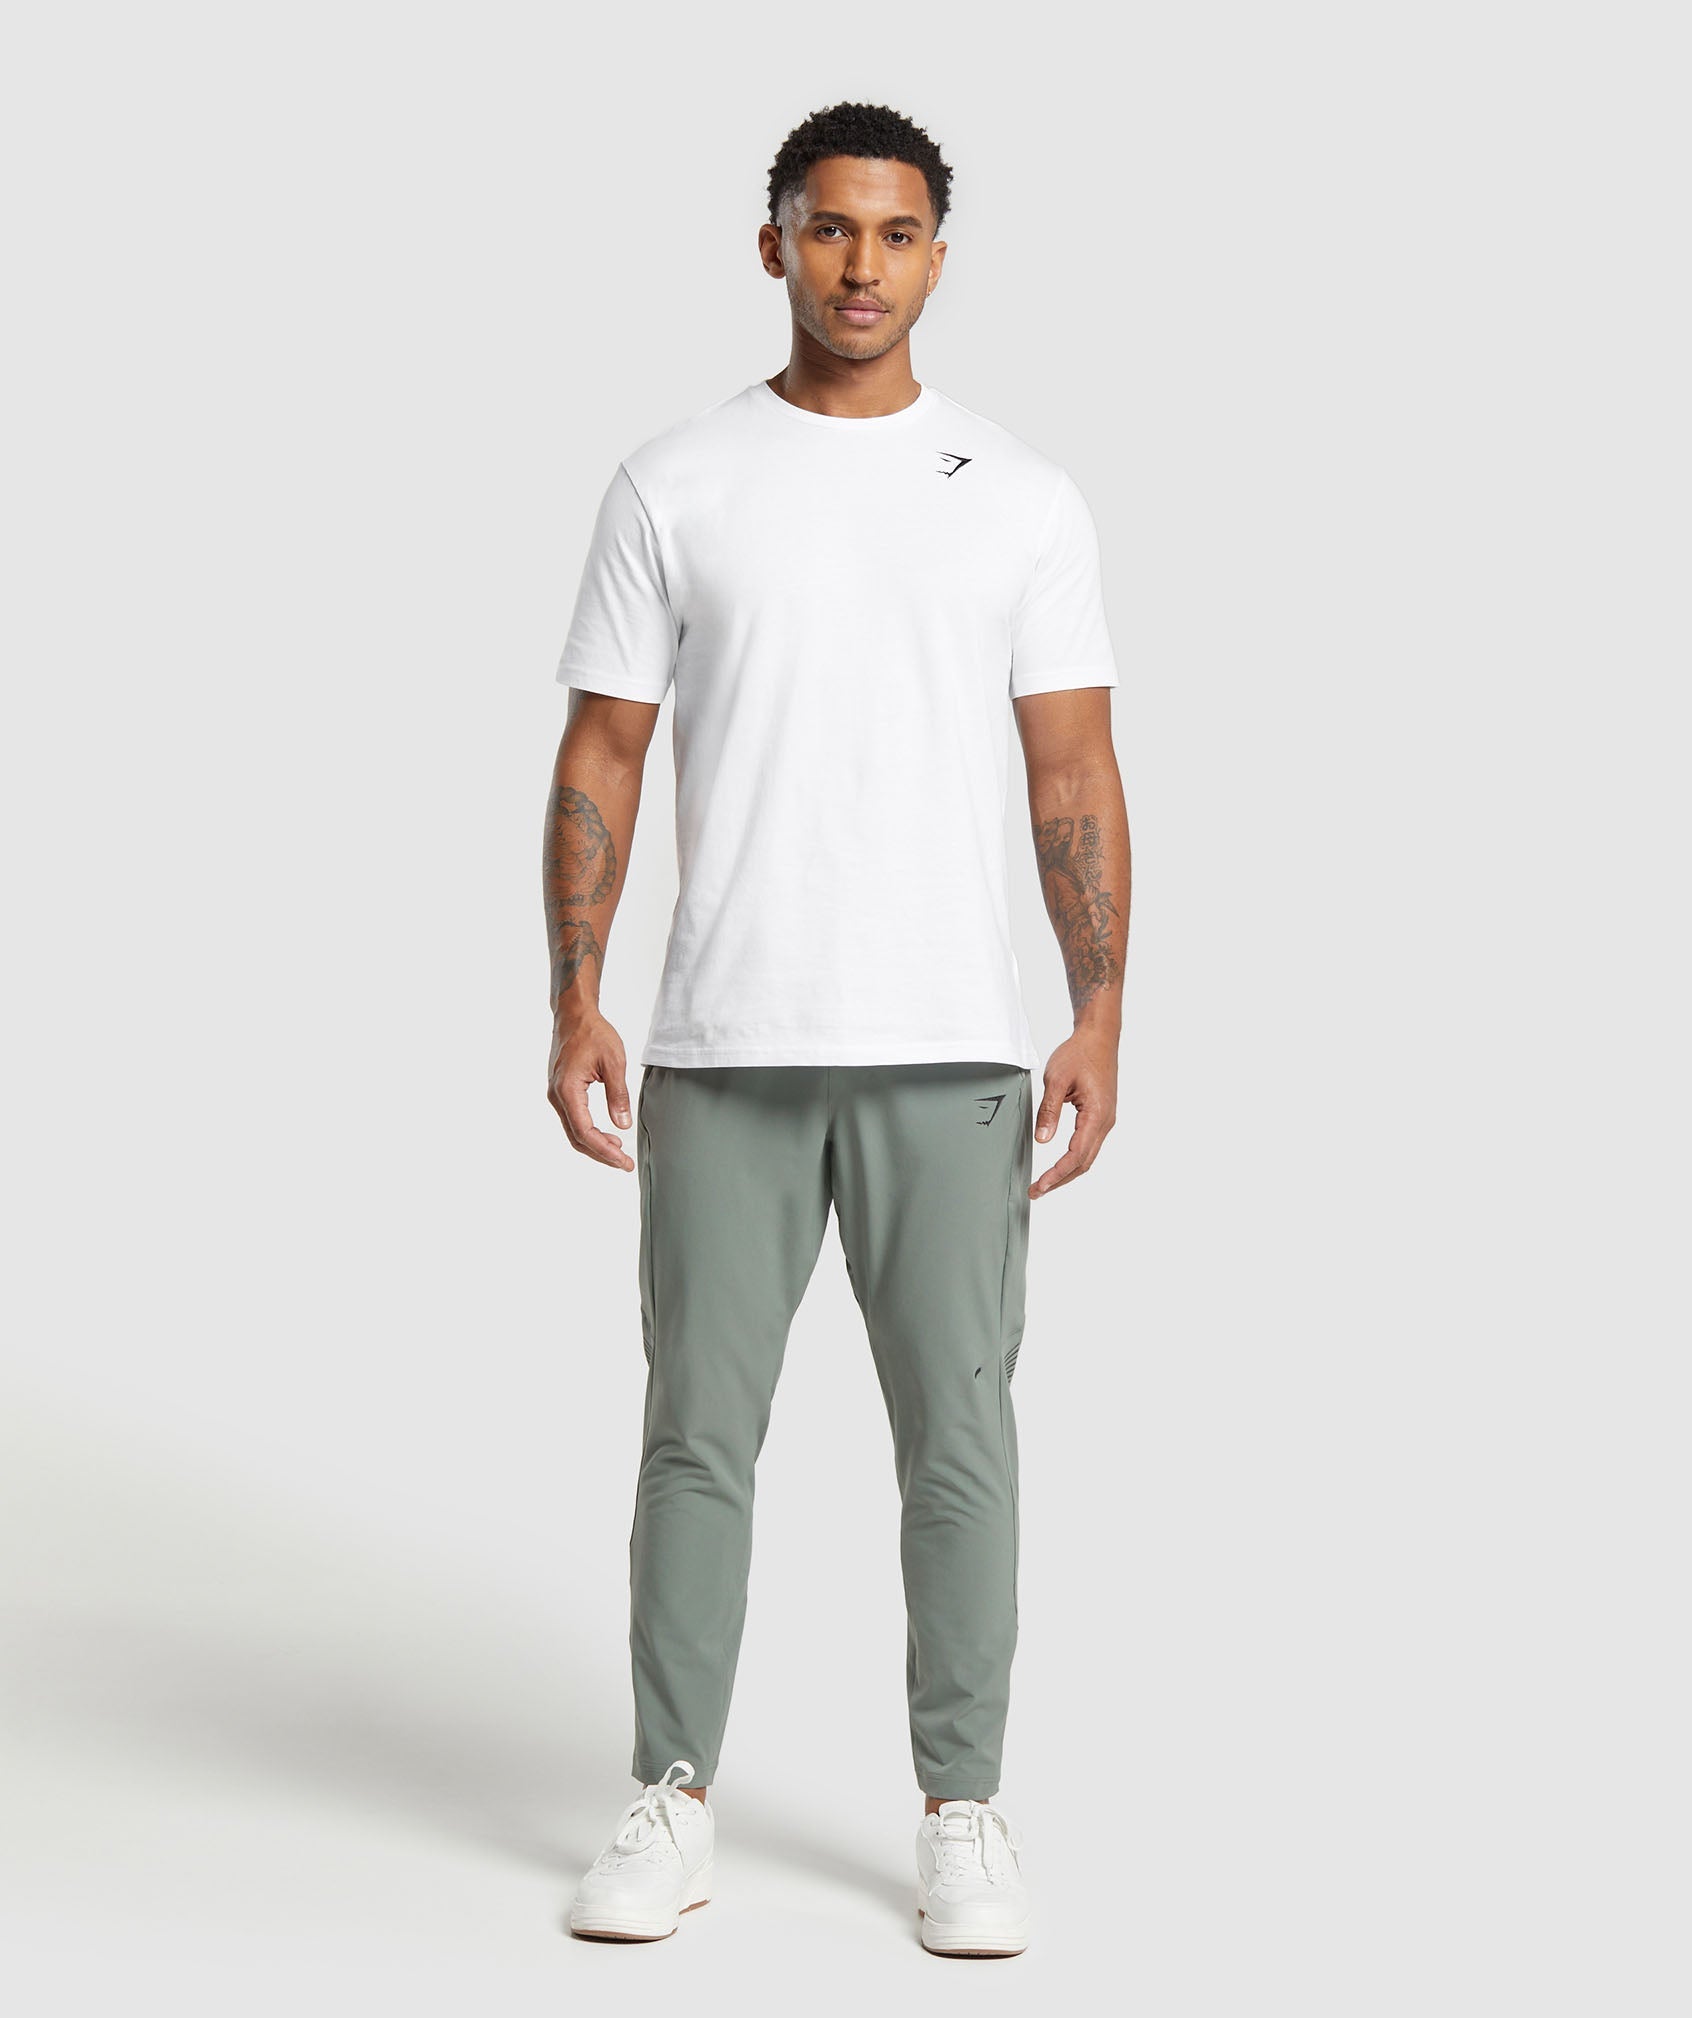 Apex Jogger in Unit Green - view 4